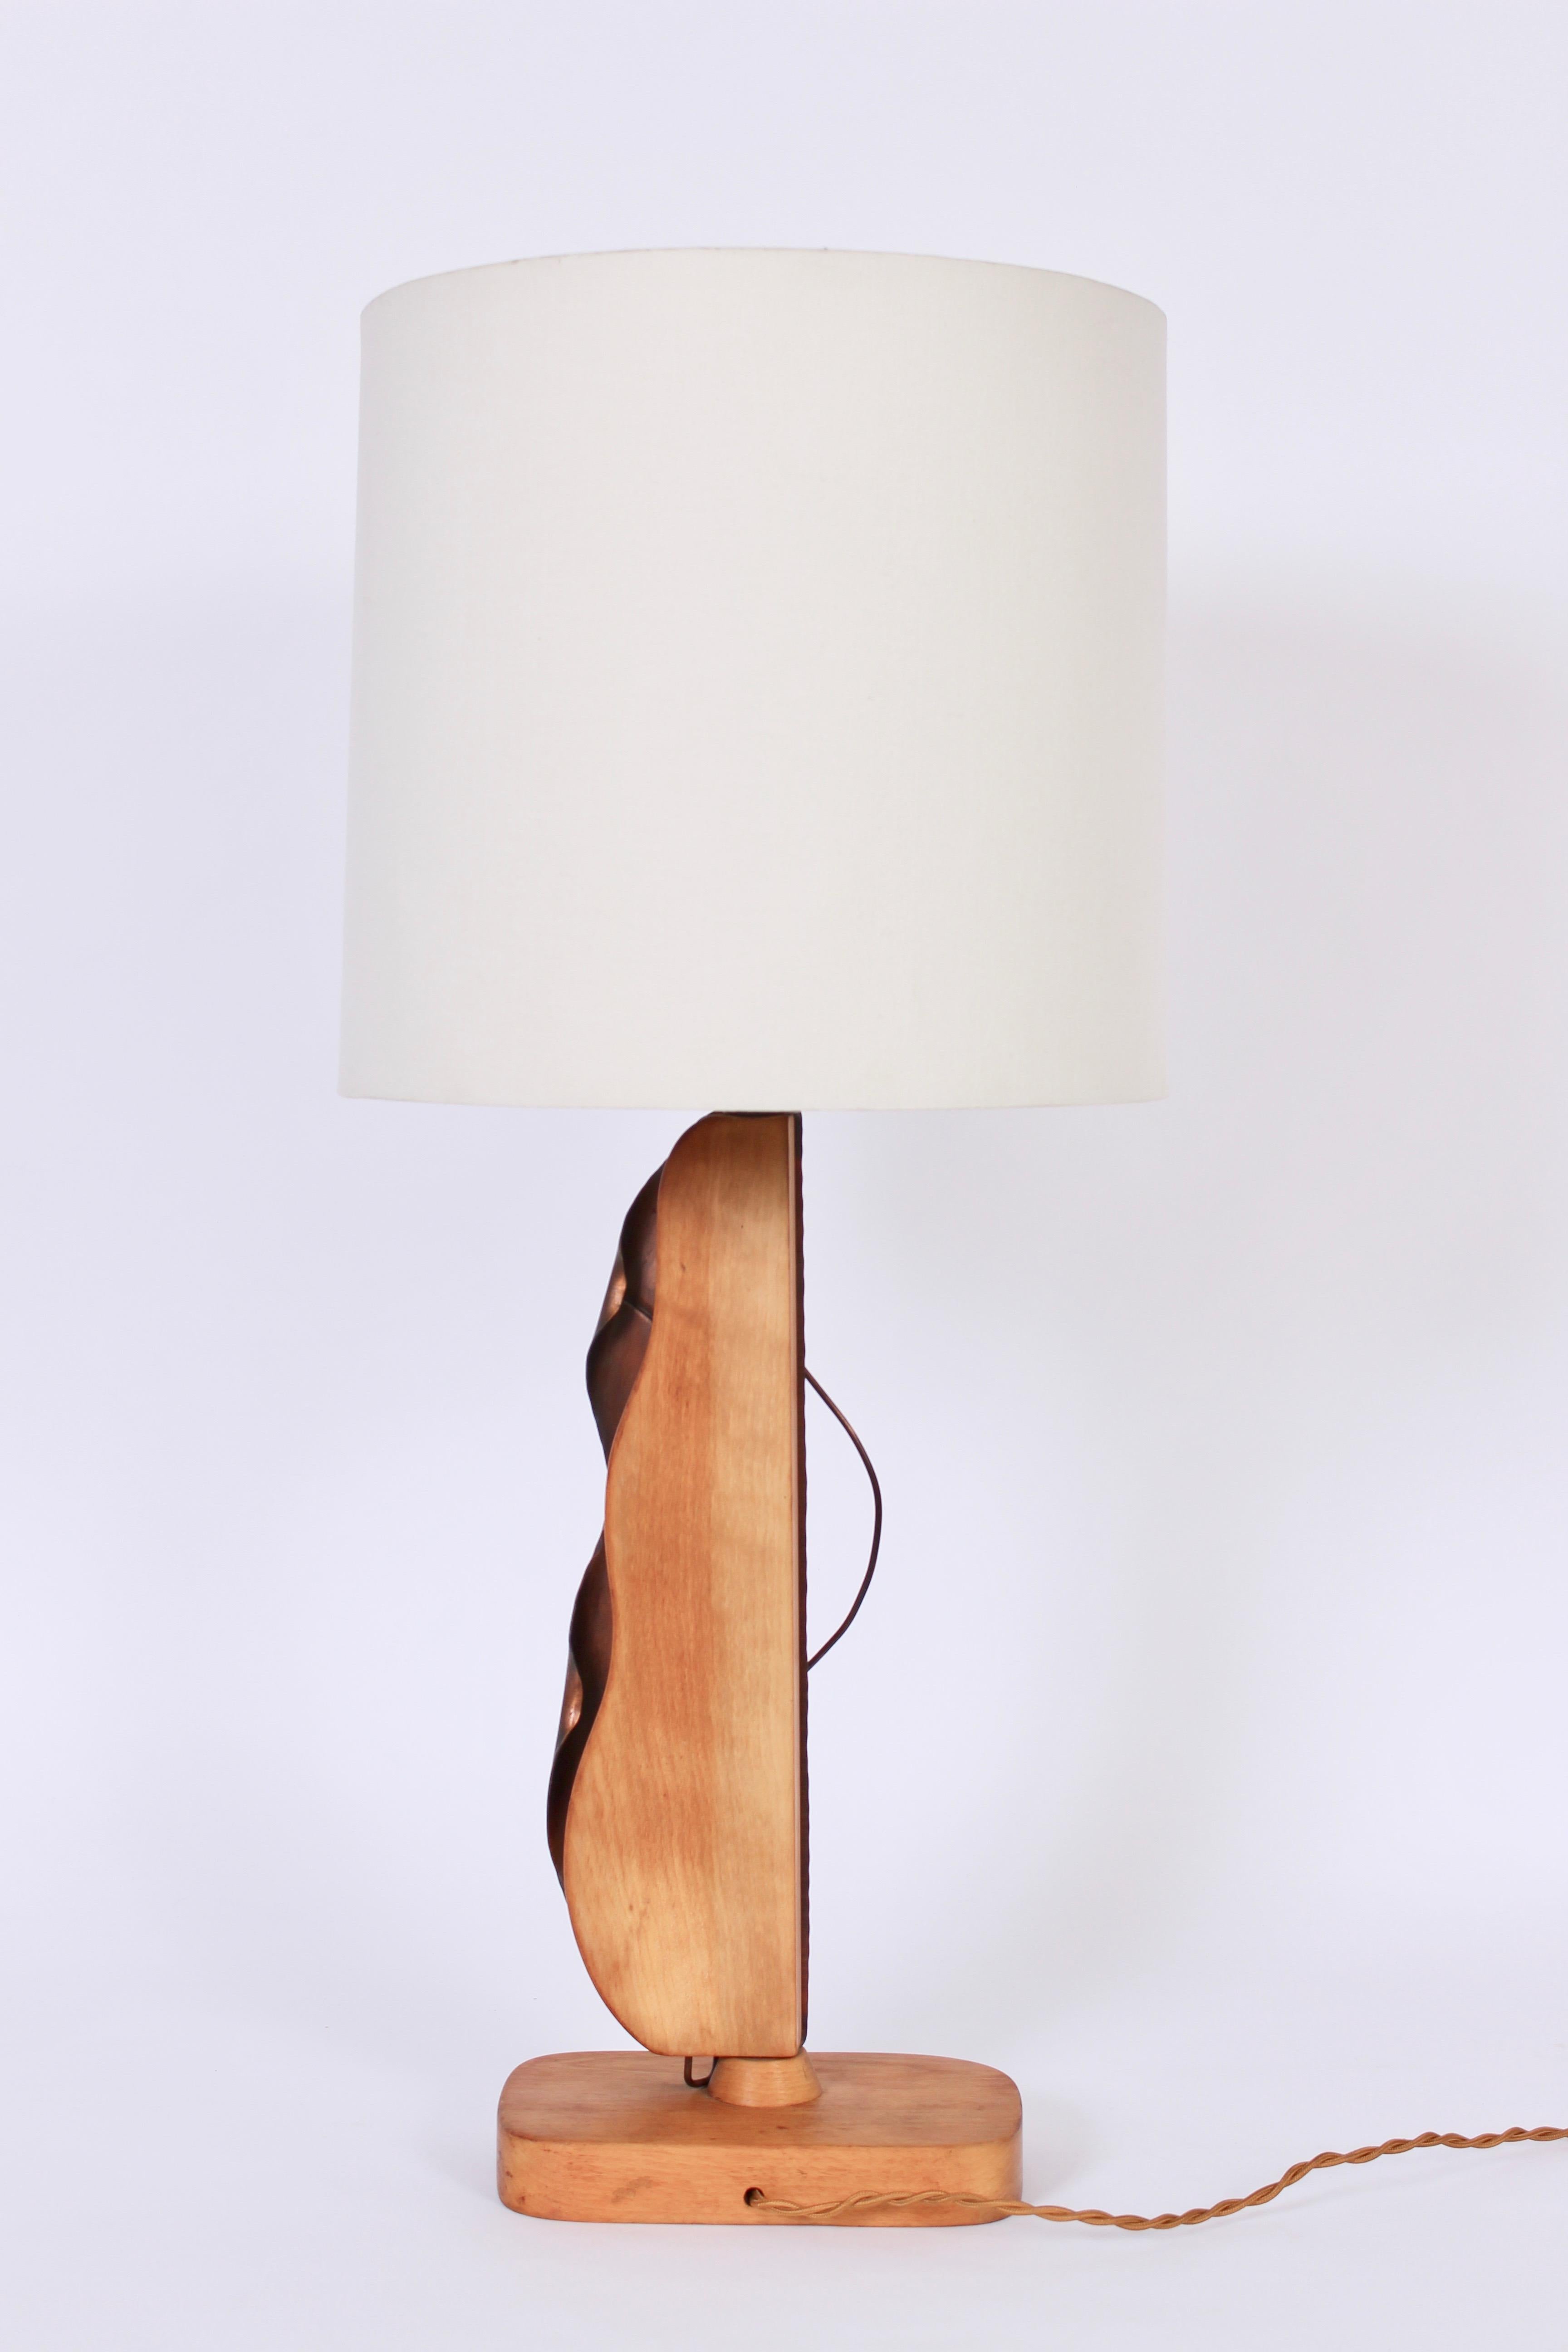 Larger American Mid Century handcrafted Yasha Heifetz copper and bleached mahogany table lamp. Featuring a hand sculpted abstract copper panel and mahogany body atop a rounded rectangular mahogany base. Shade shown for display only and not for sale